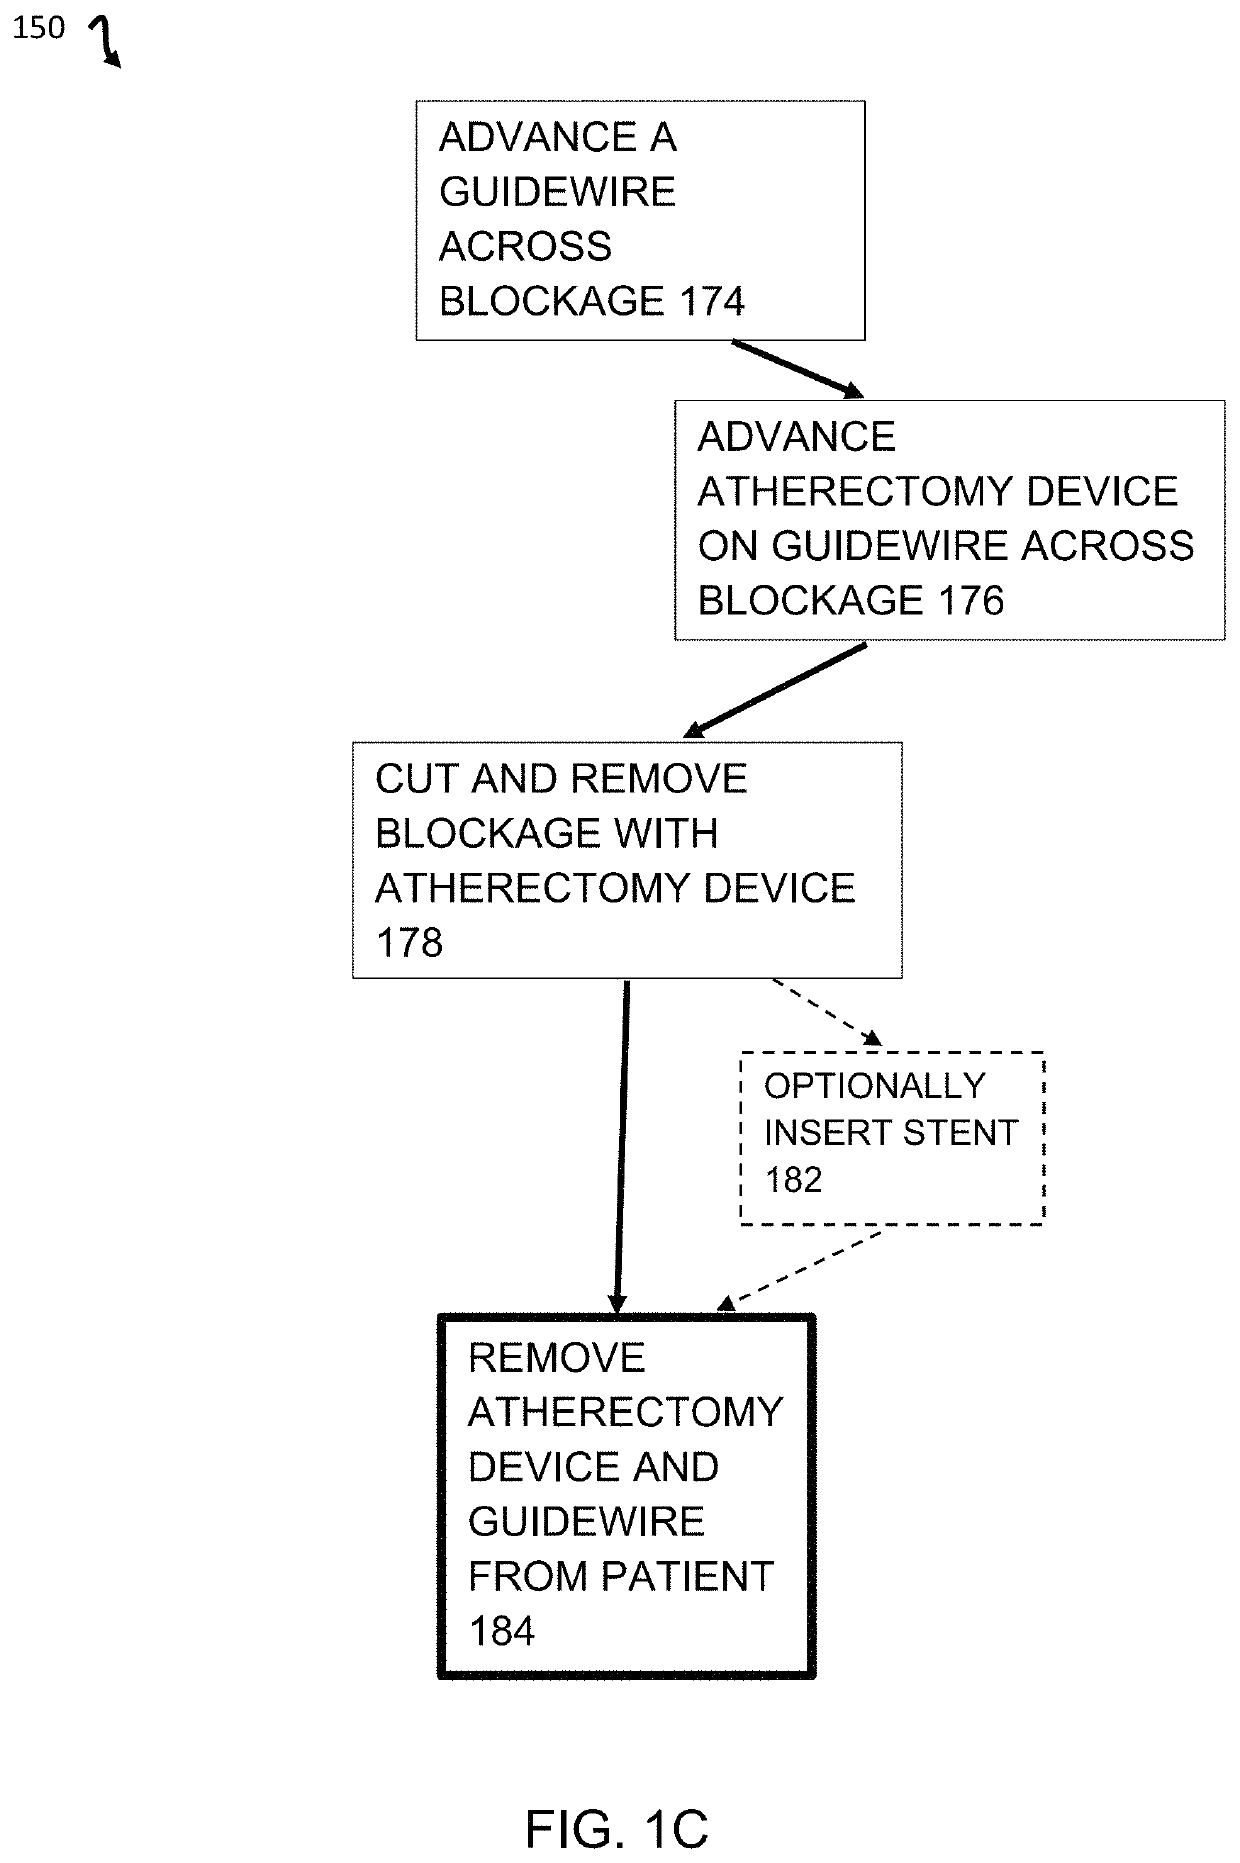 Atherectomy devices that are self-driving with controlled deflection